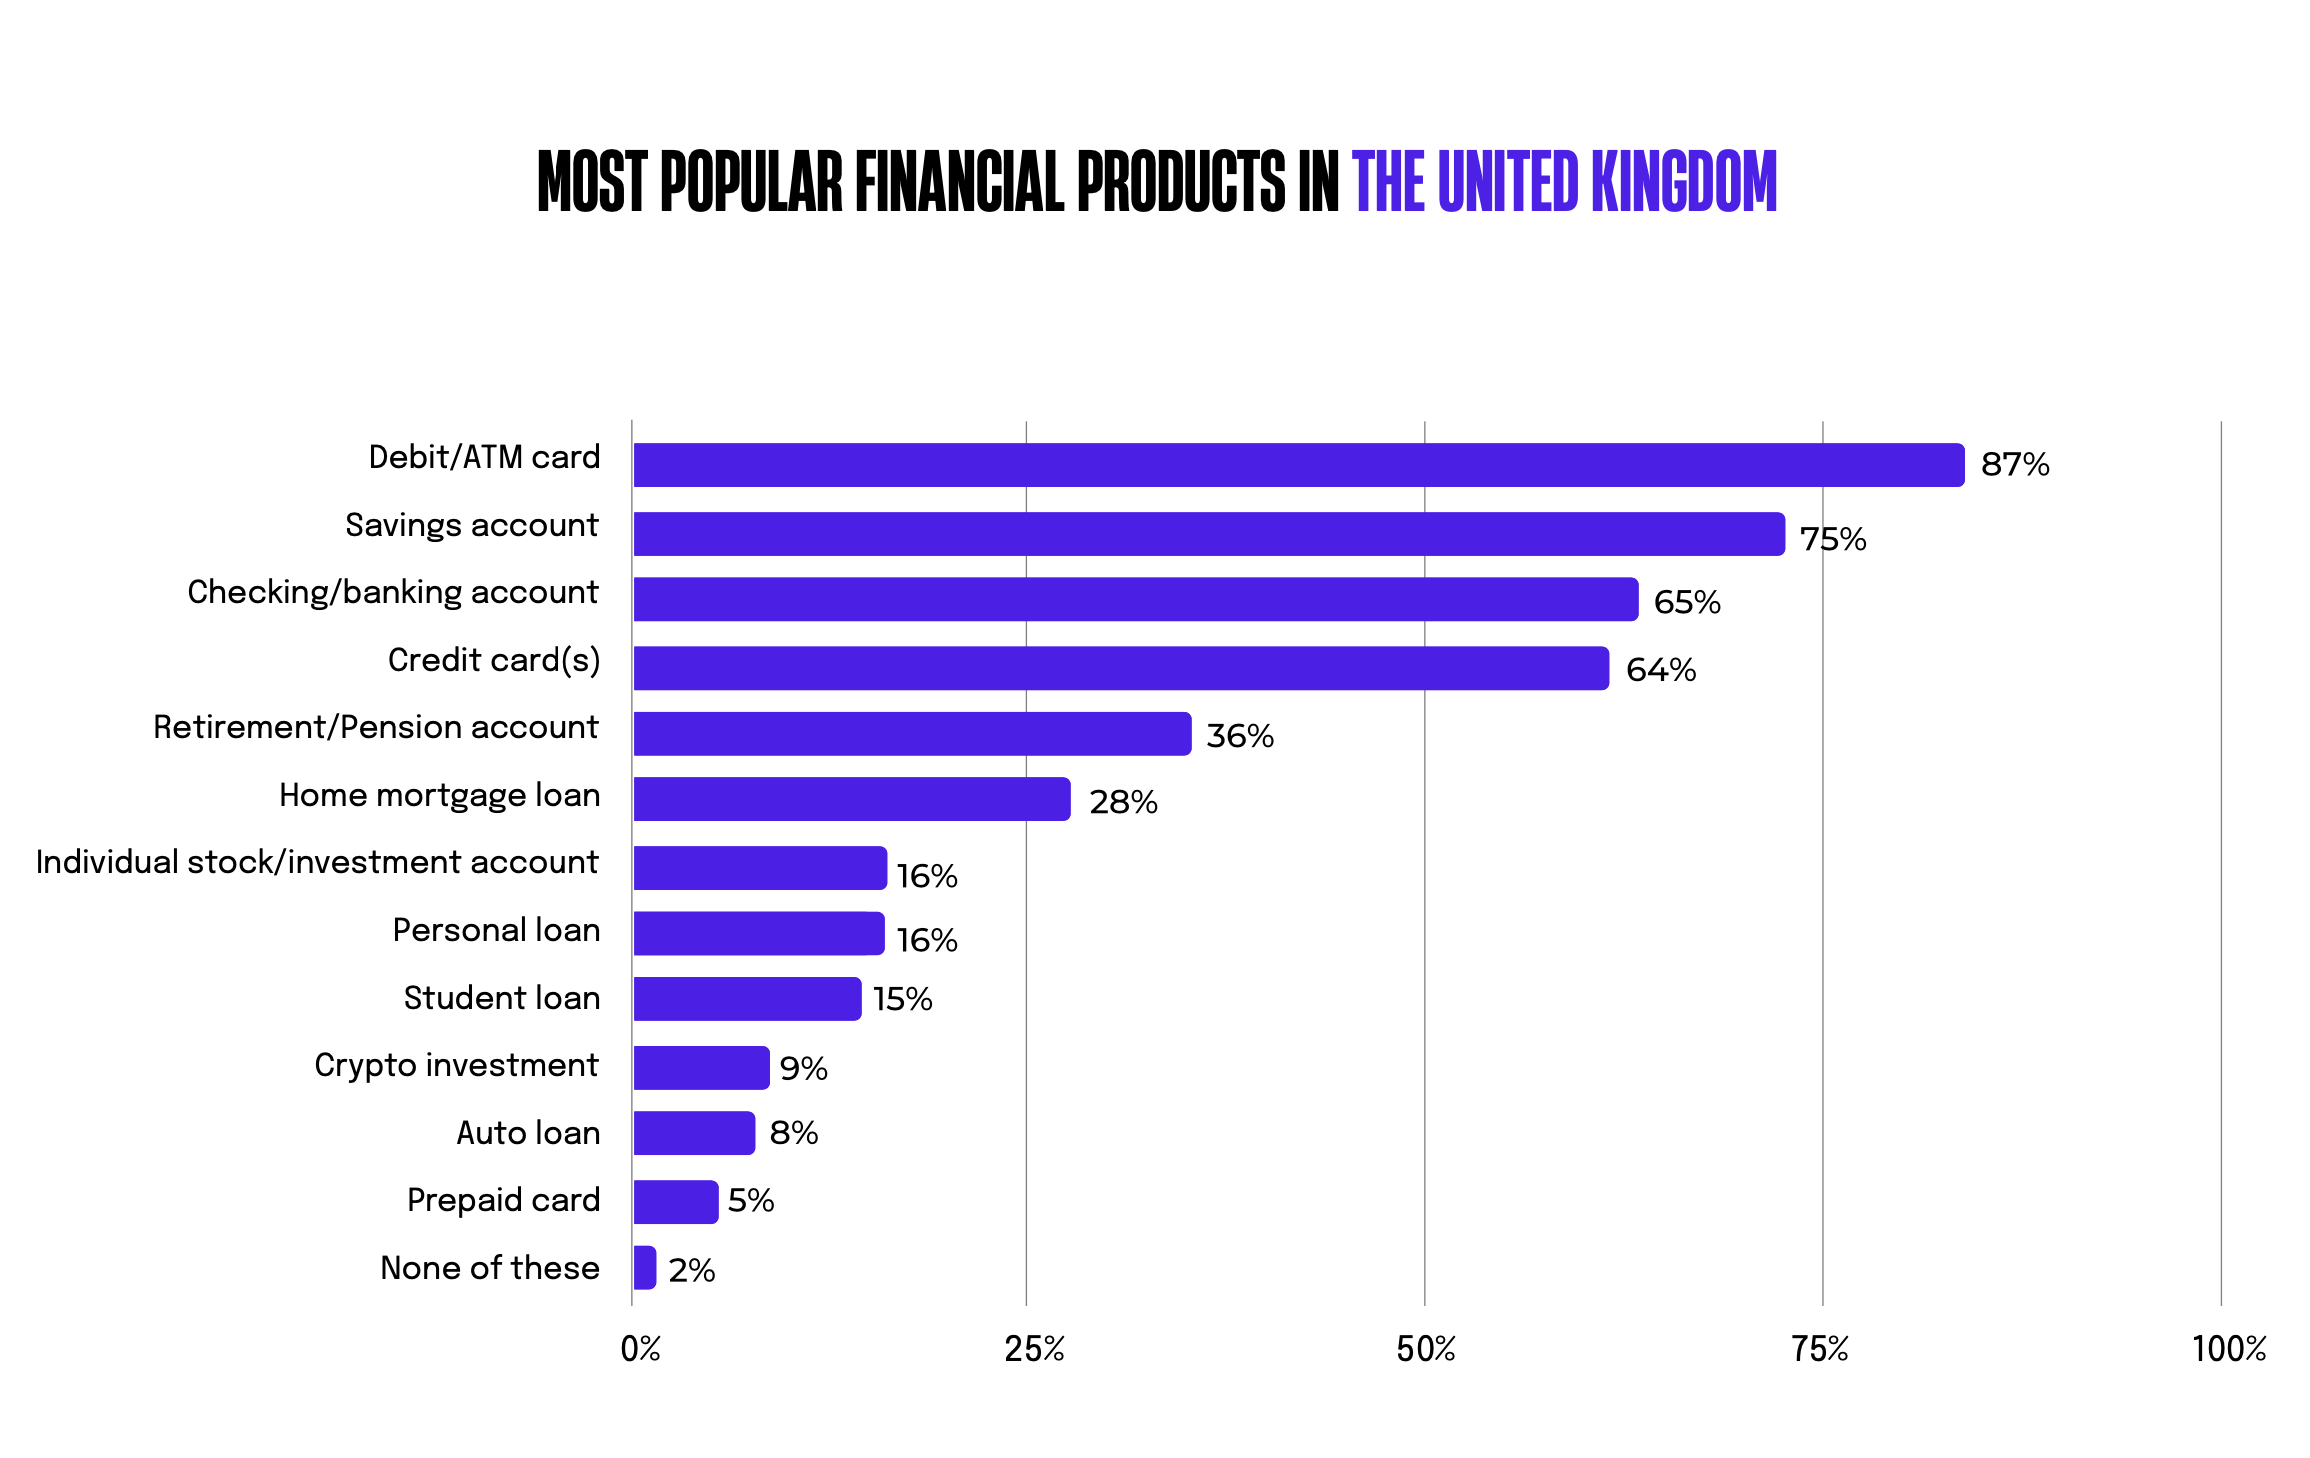 Chart: The most popular financial products in the United Kingdom